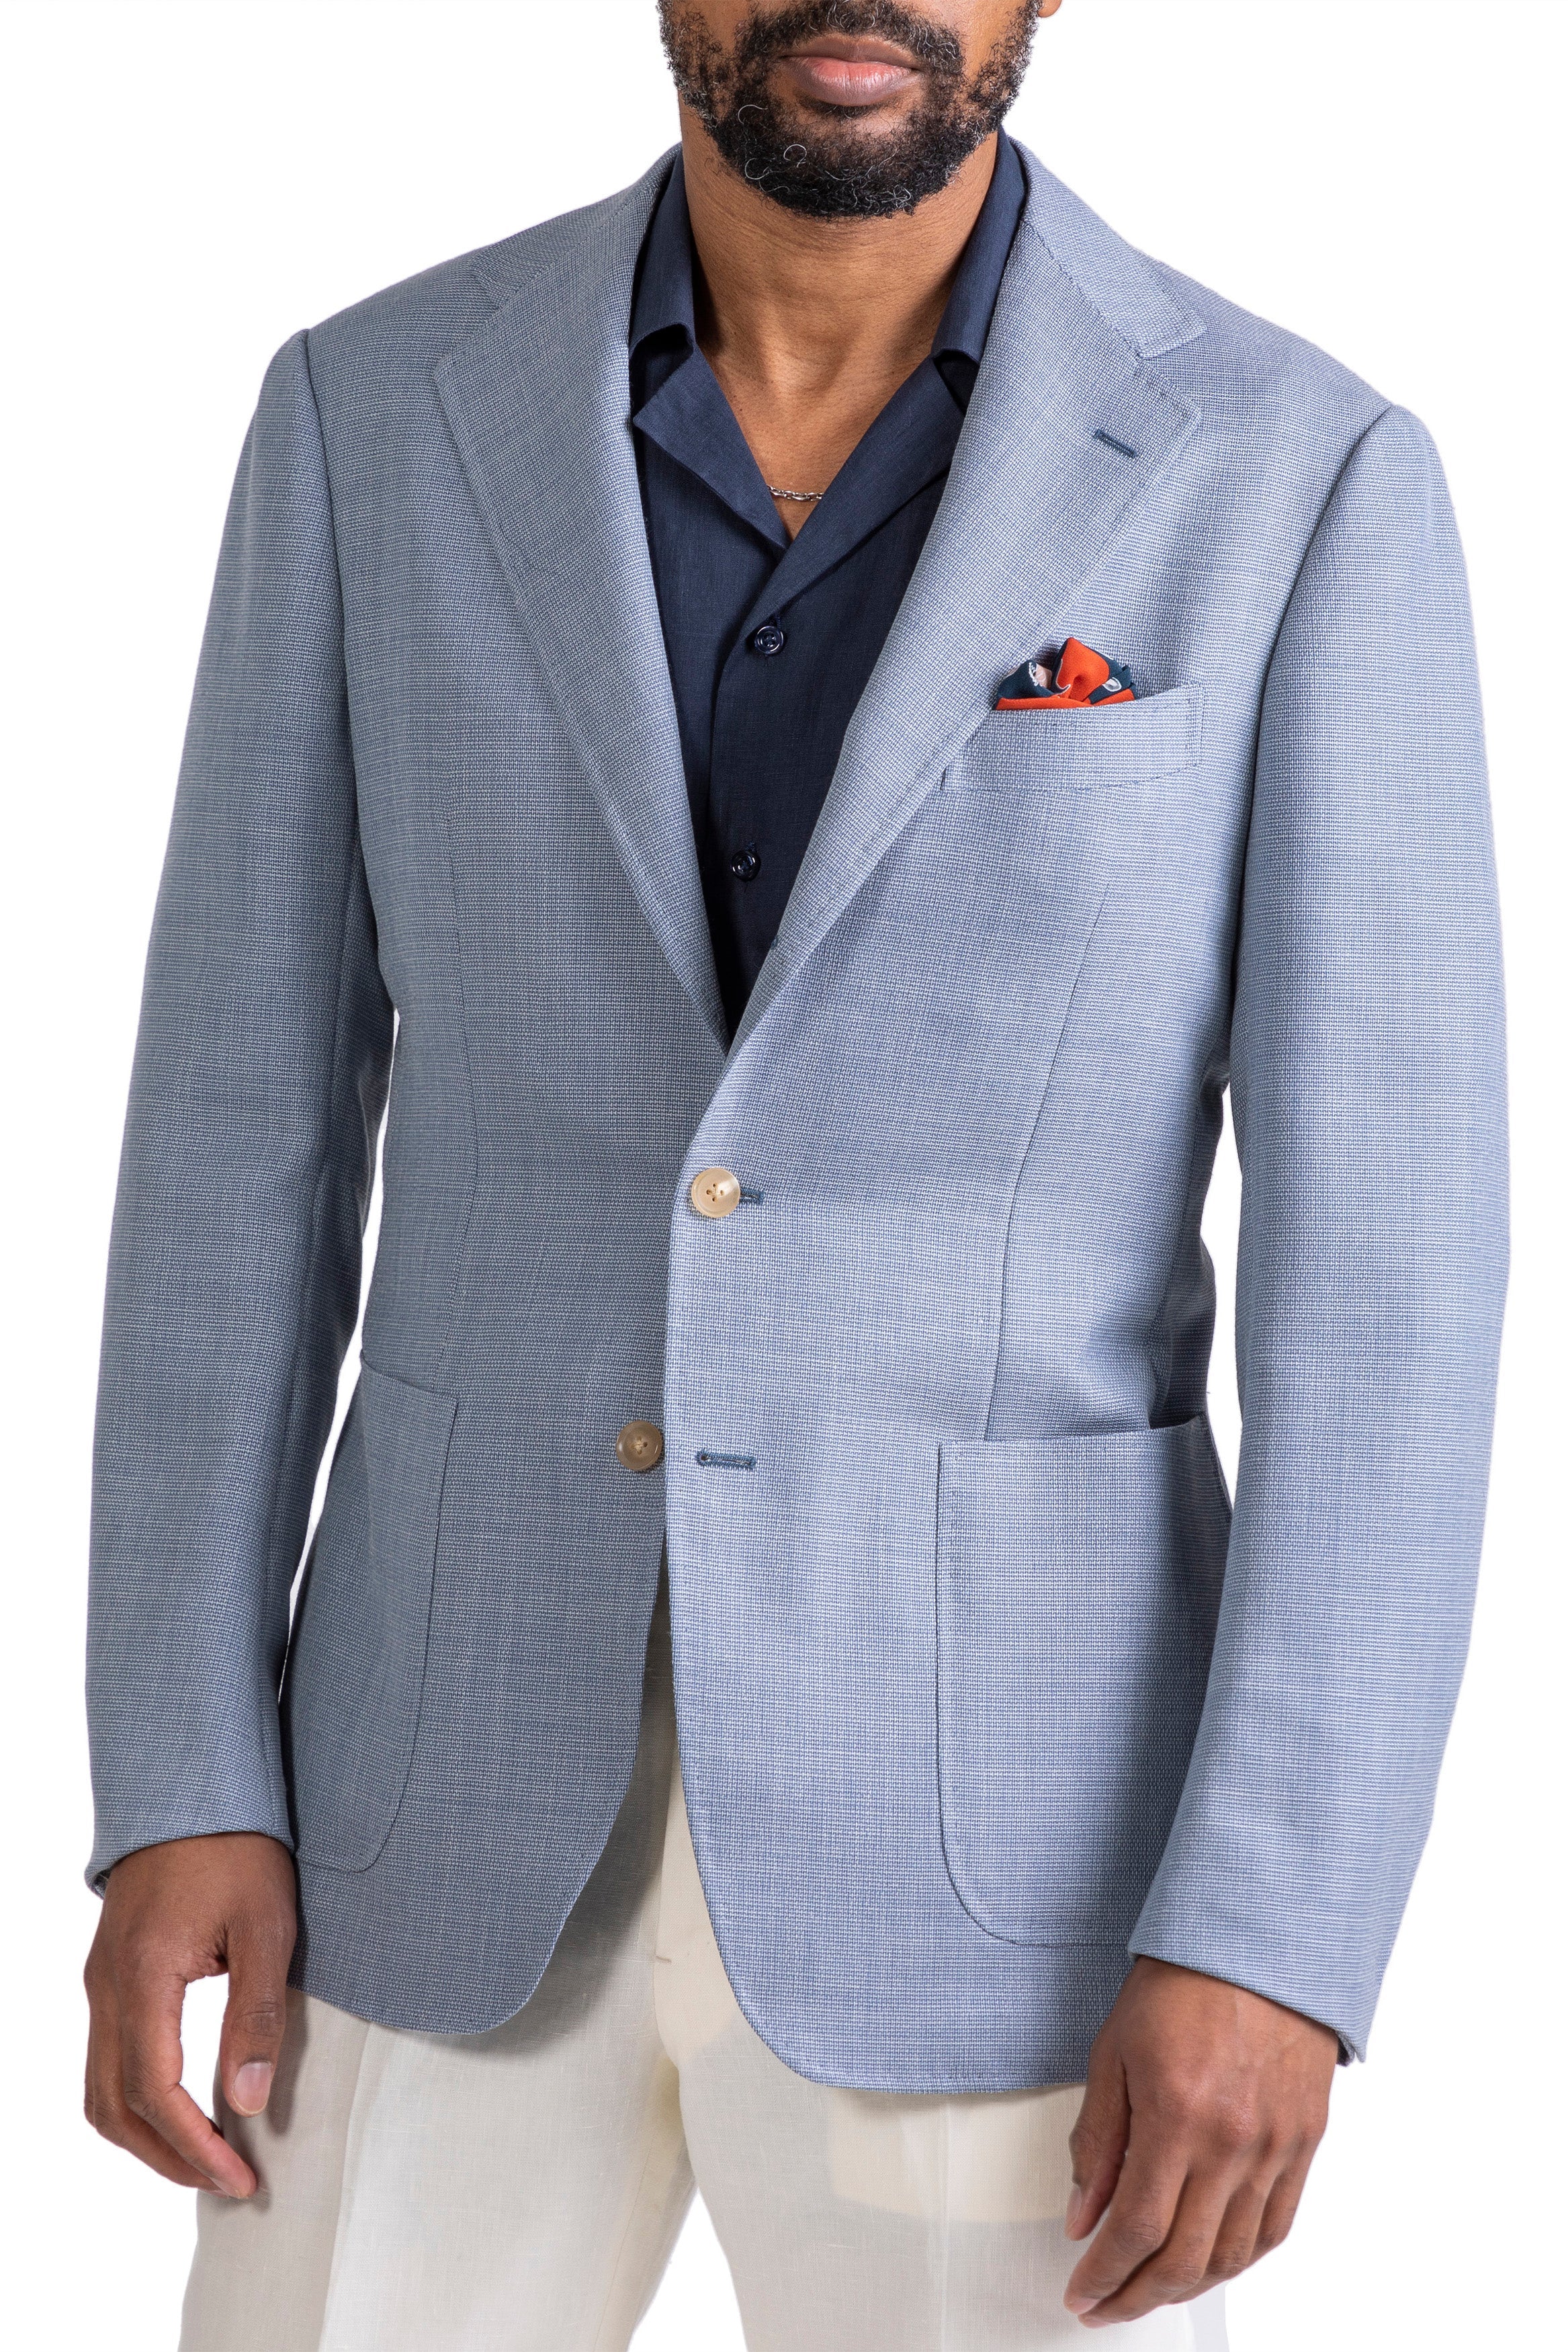 The Armoury Model 3 Blue Super 120's Wool-Mohair Sport Coat